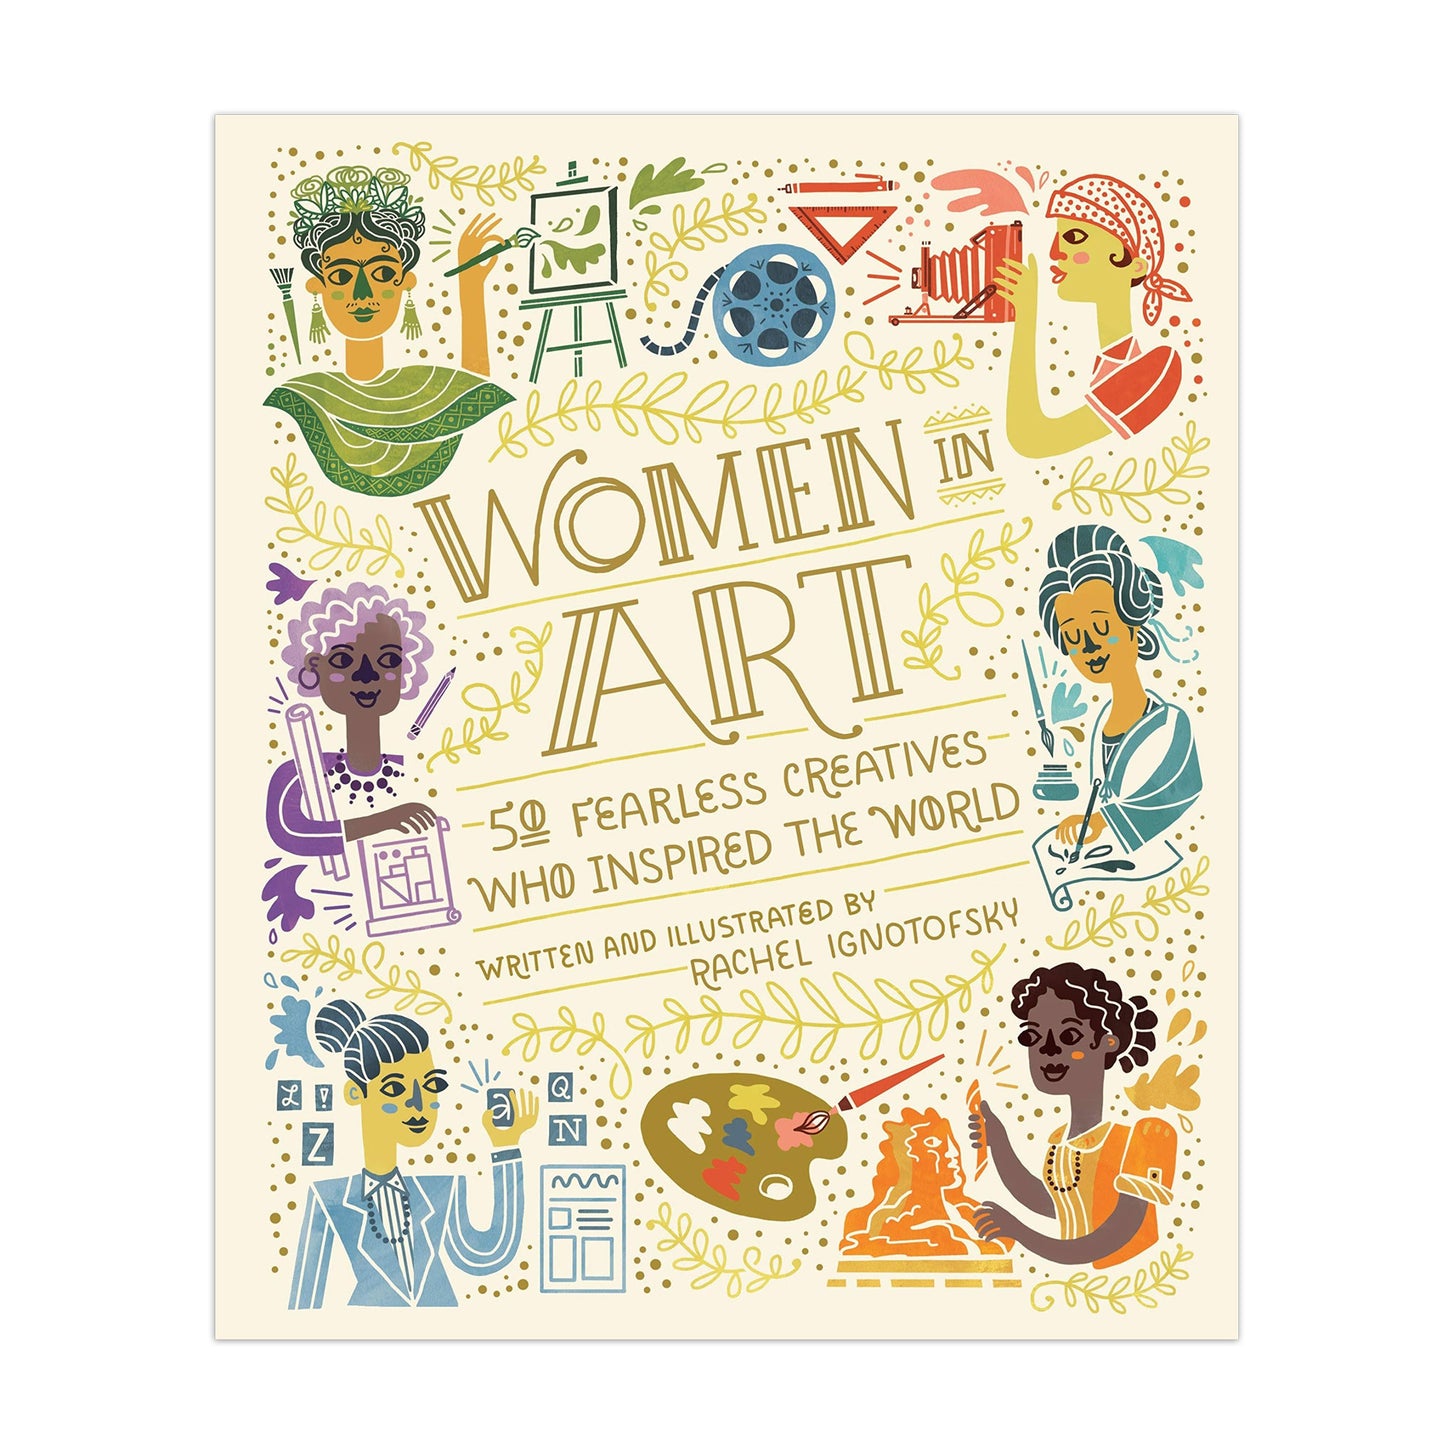 Women In Art: 50 Fearless Creatives Who Inspired The World Book